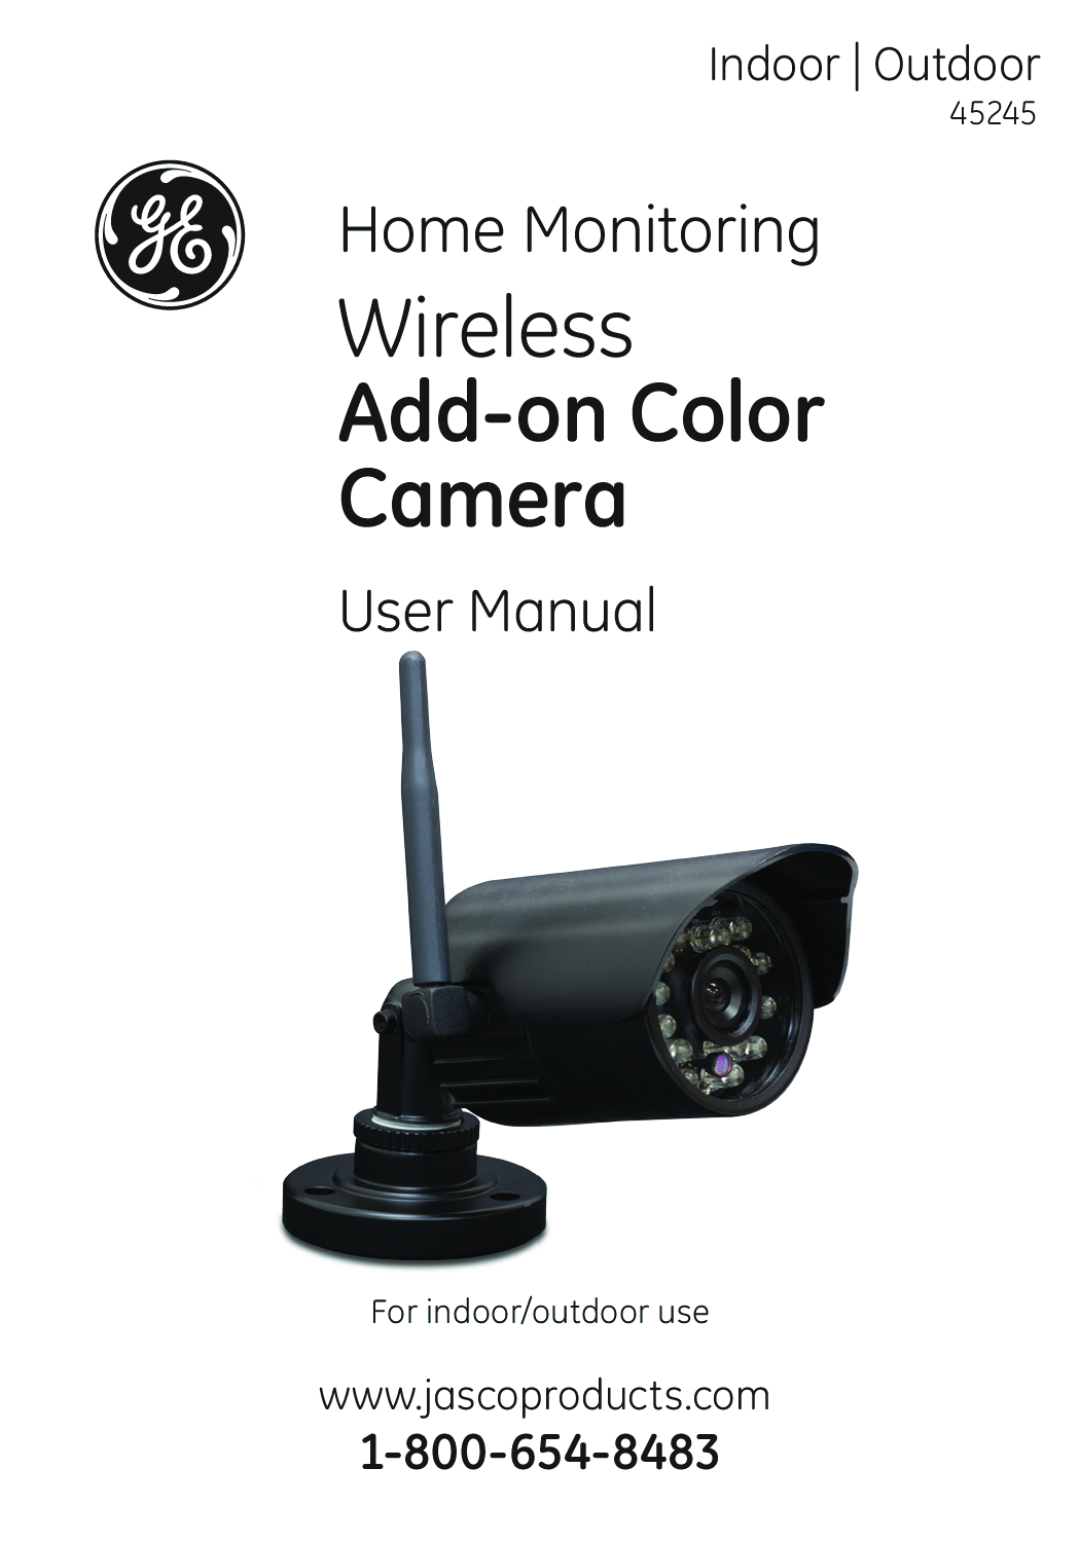 Jasco 45245 user manual Wireless, Add-onColor Camera, Home Monitoring, Indoor Outdoor 